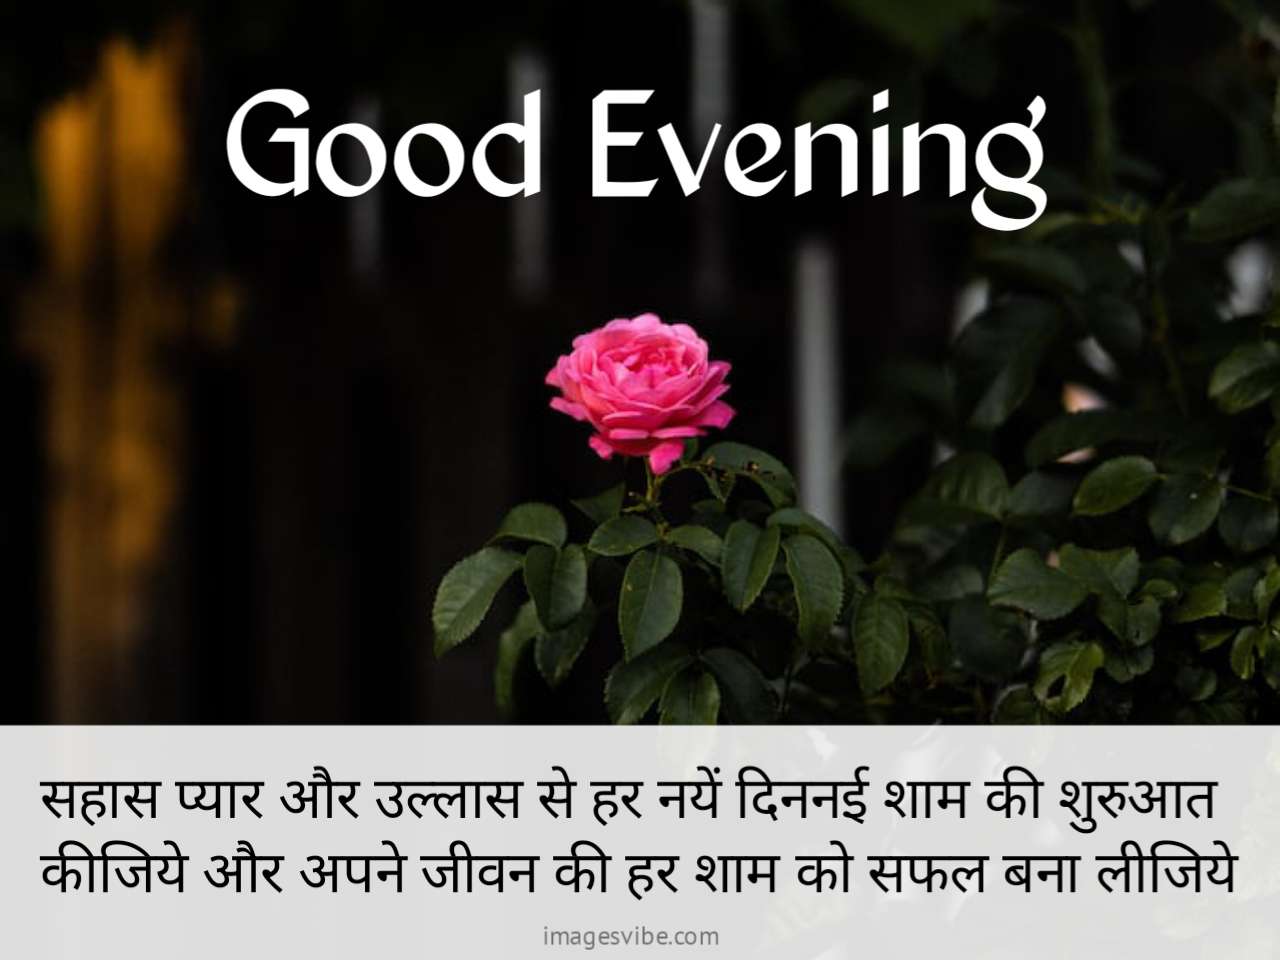 Beautiful Good Evening Hindi Images & Quotes in 2023 - Images Vibe